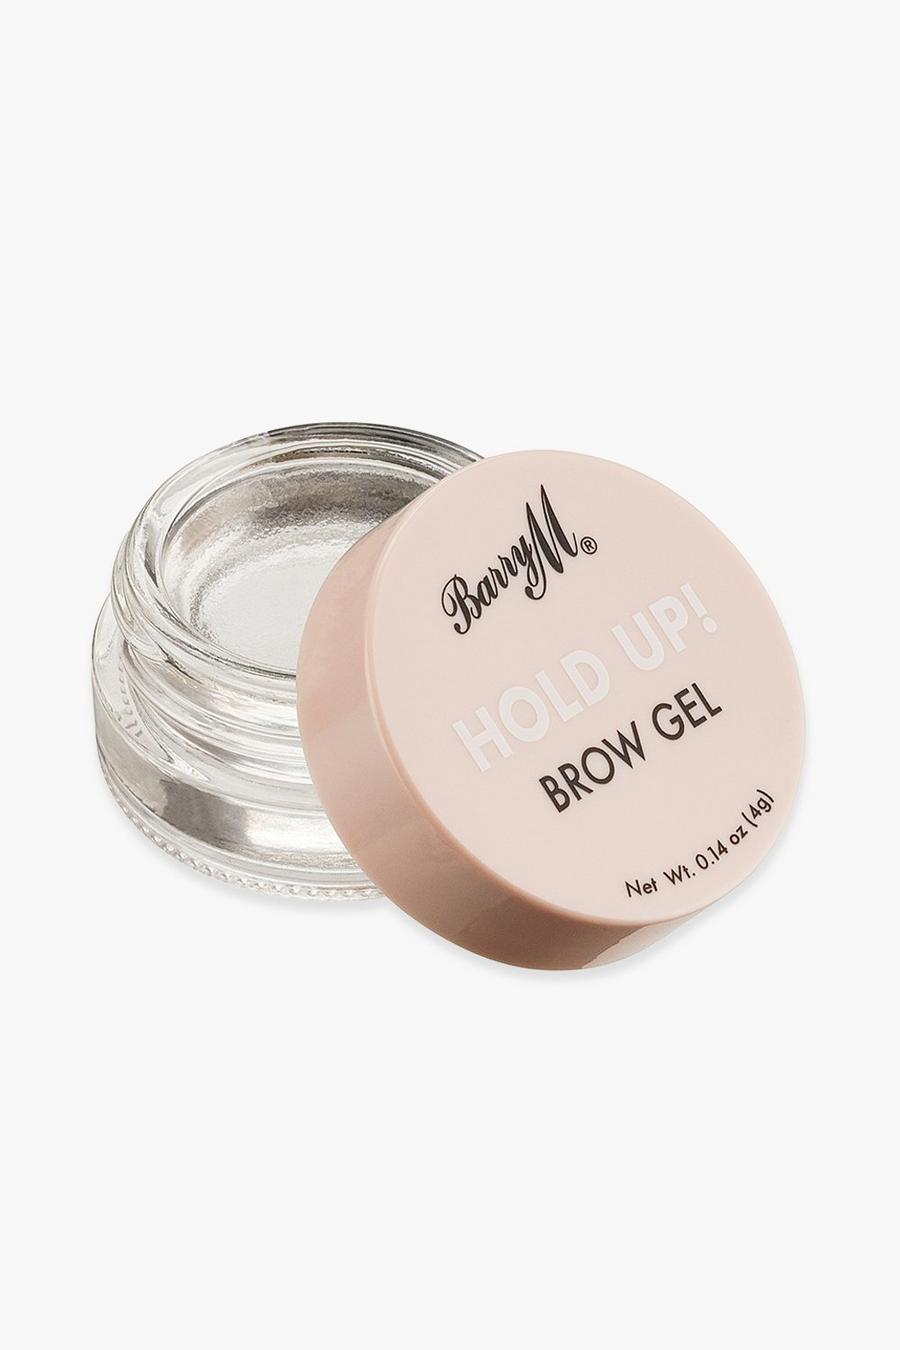 Brown Barry M Hold Up! Brow Gel